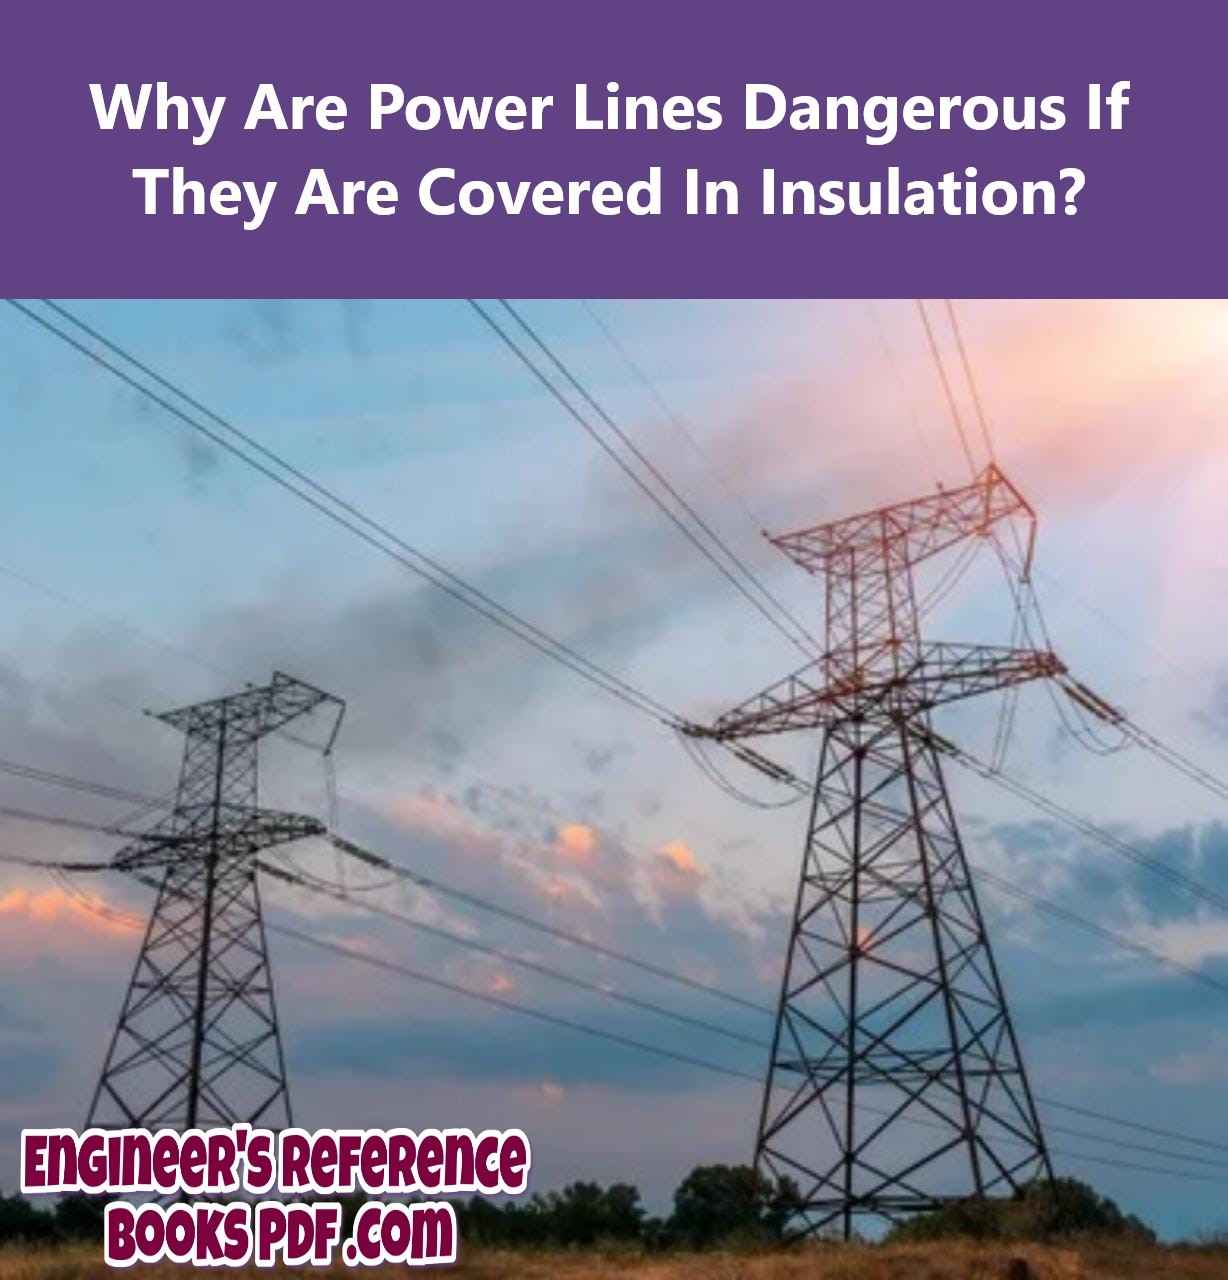 Why Are Power Lines Dangerous If They Are Covered In Insulation?